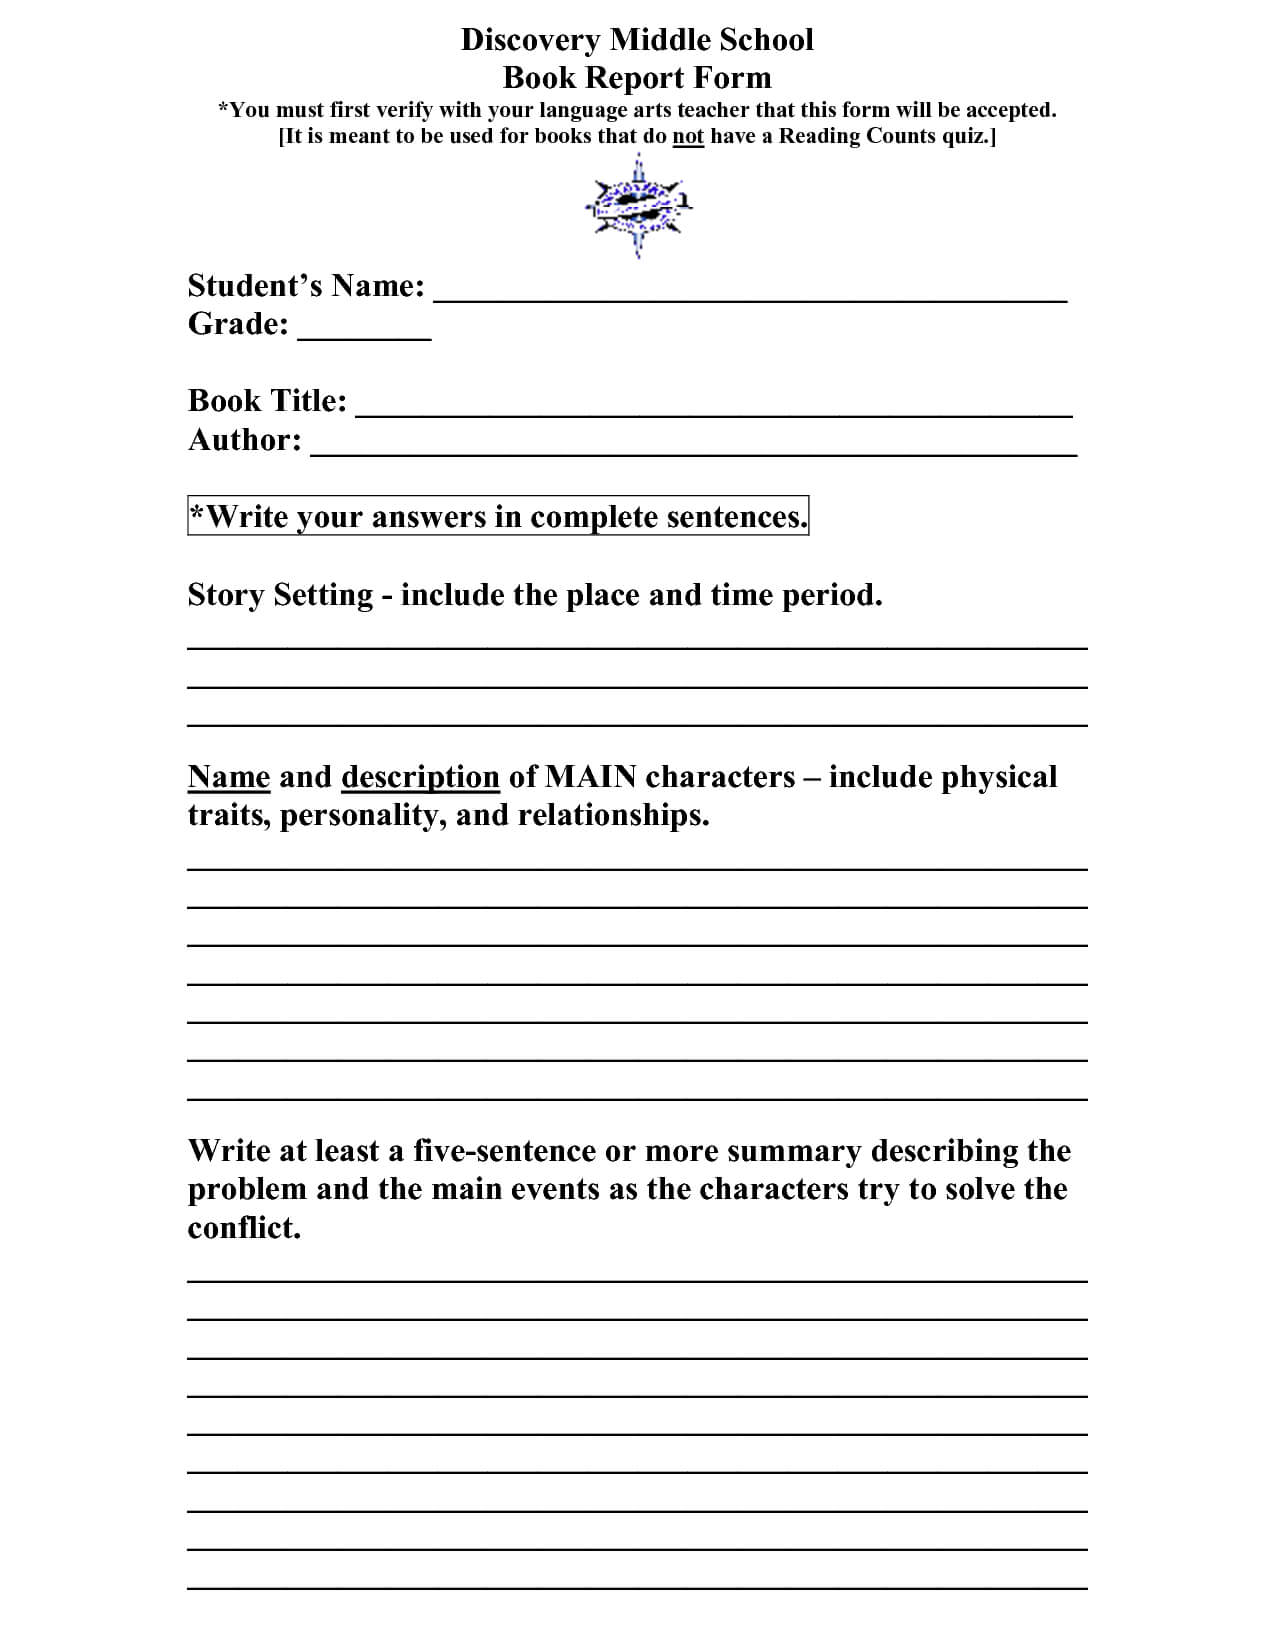 Scope Of Work Template | Book Report Templates, High School For Book Report Template Middle School